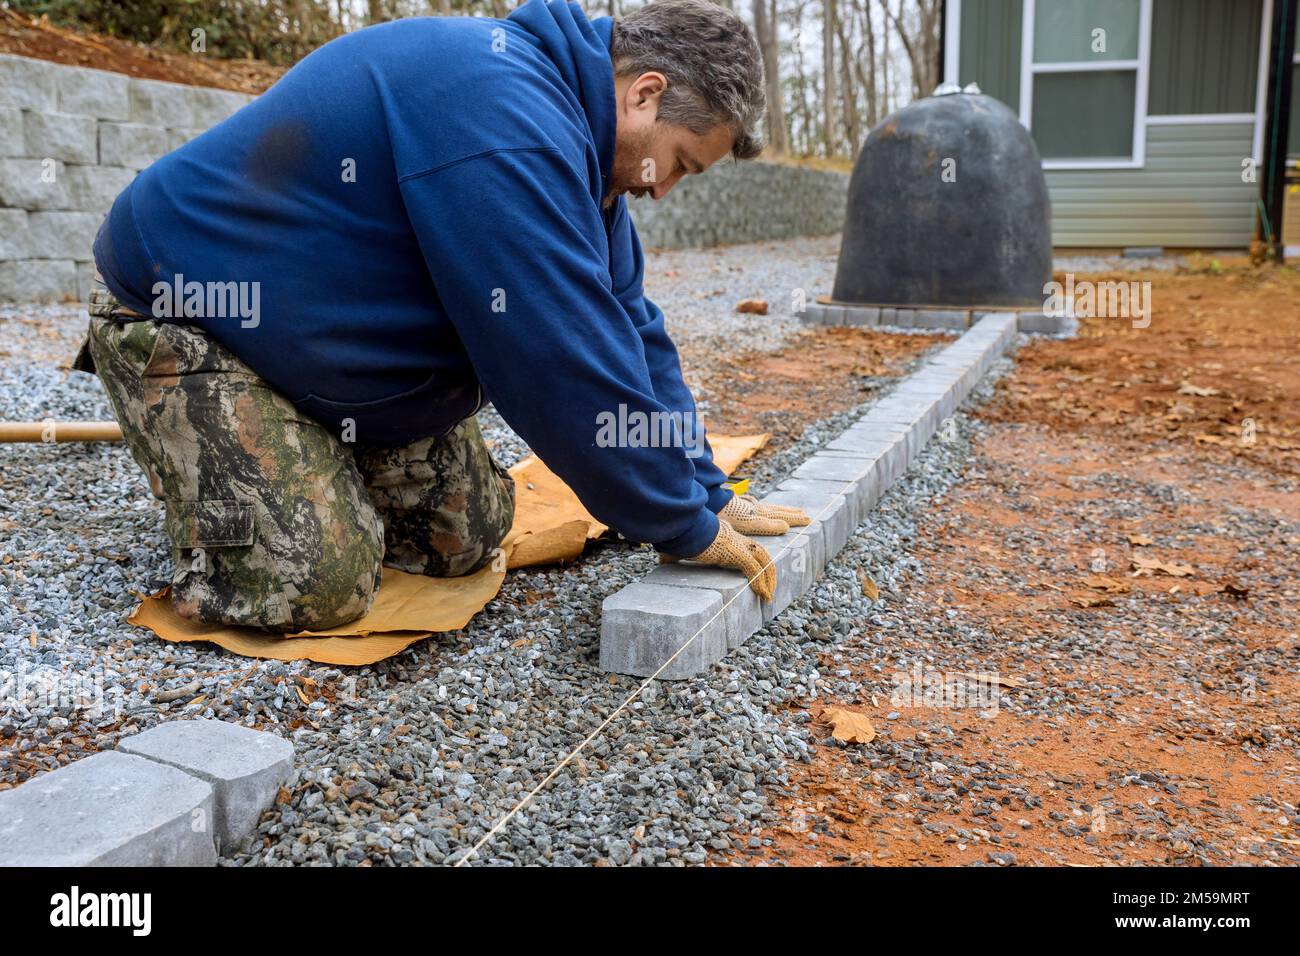 Professional paver worker lays stones for paving pathway in yard of master. Stock Photo